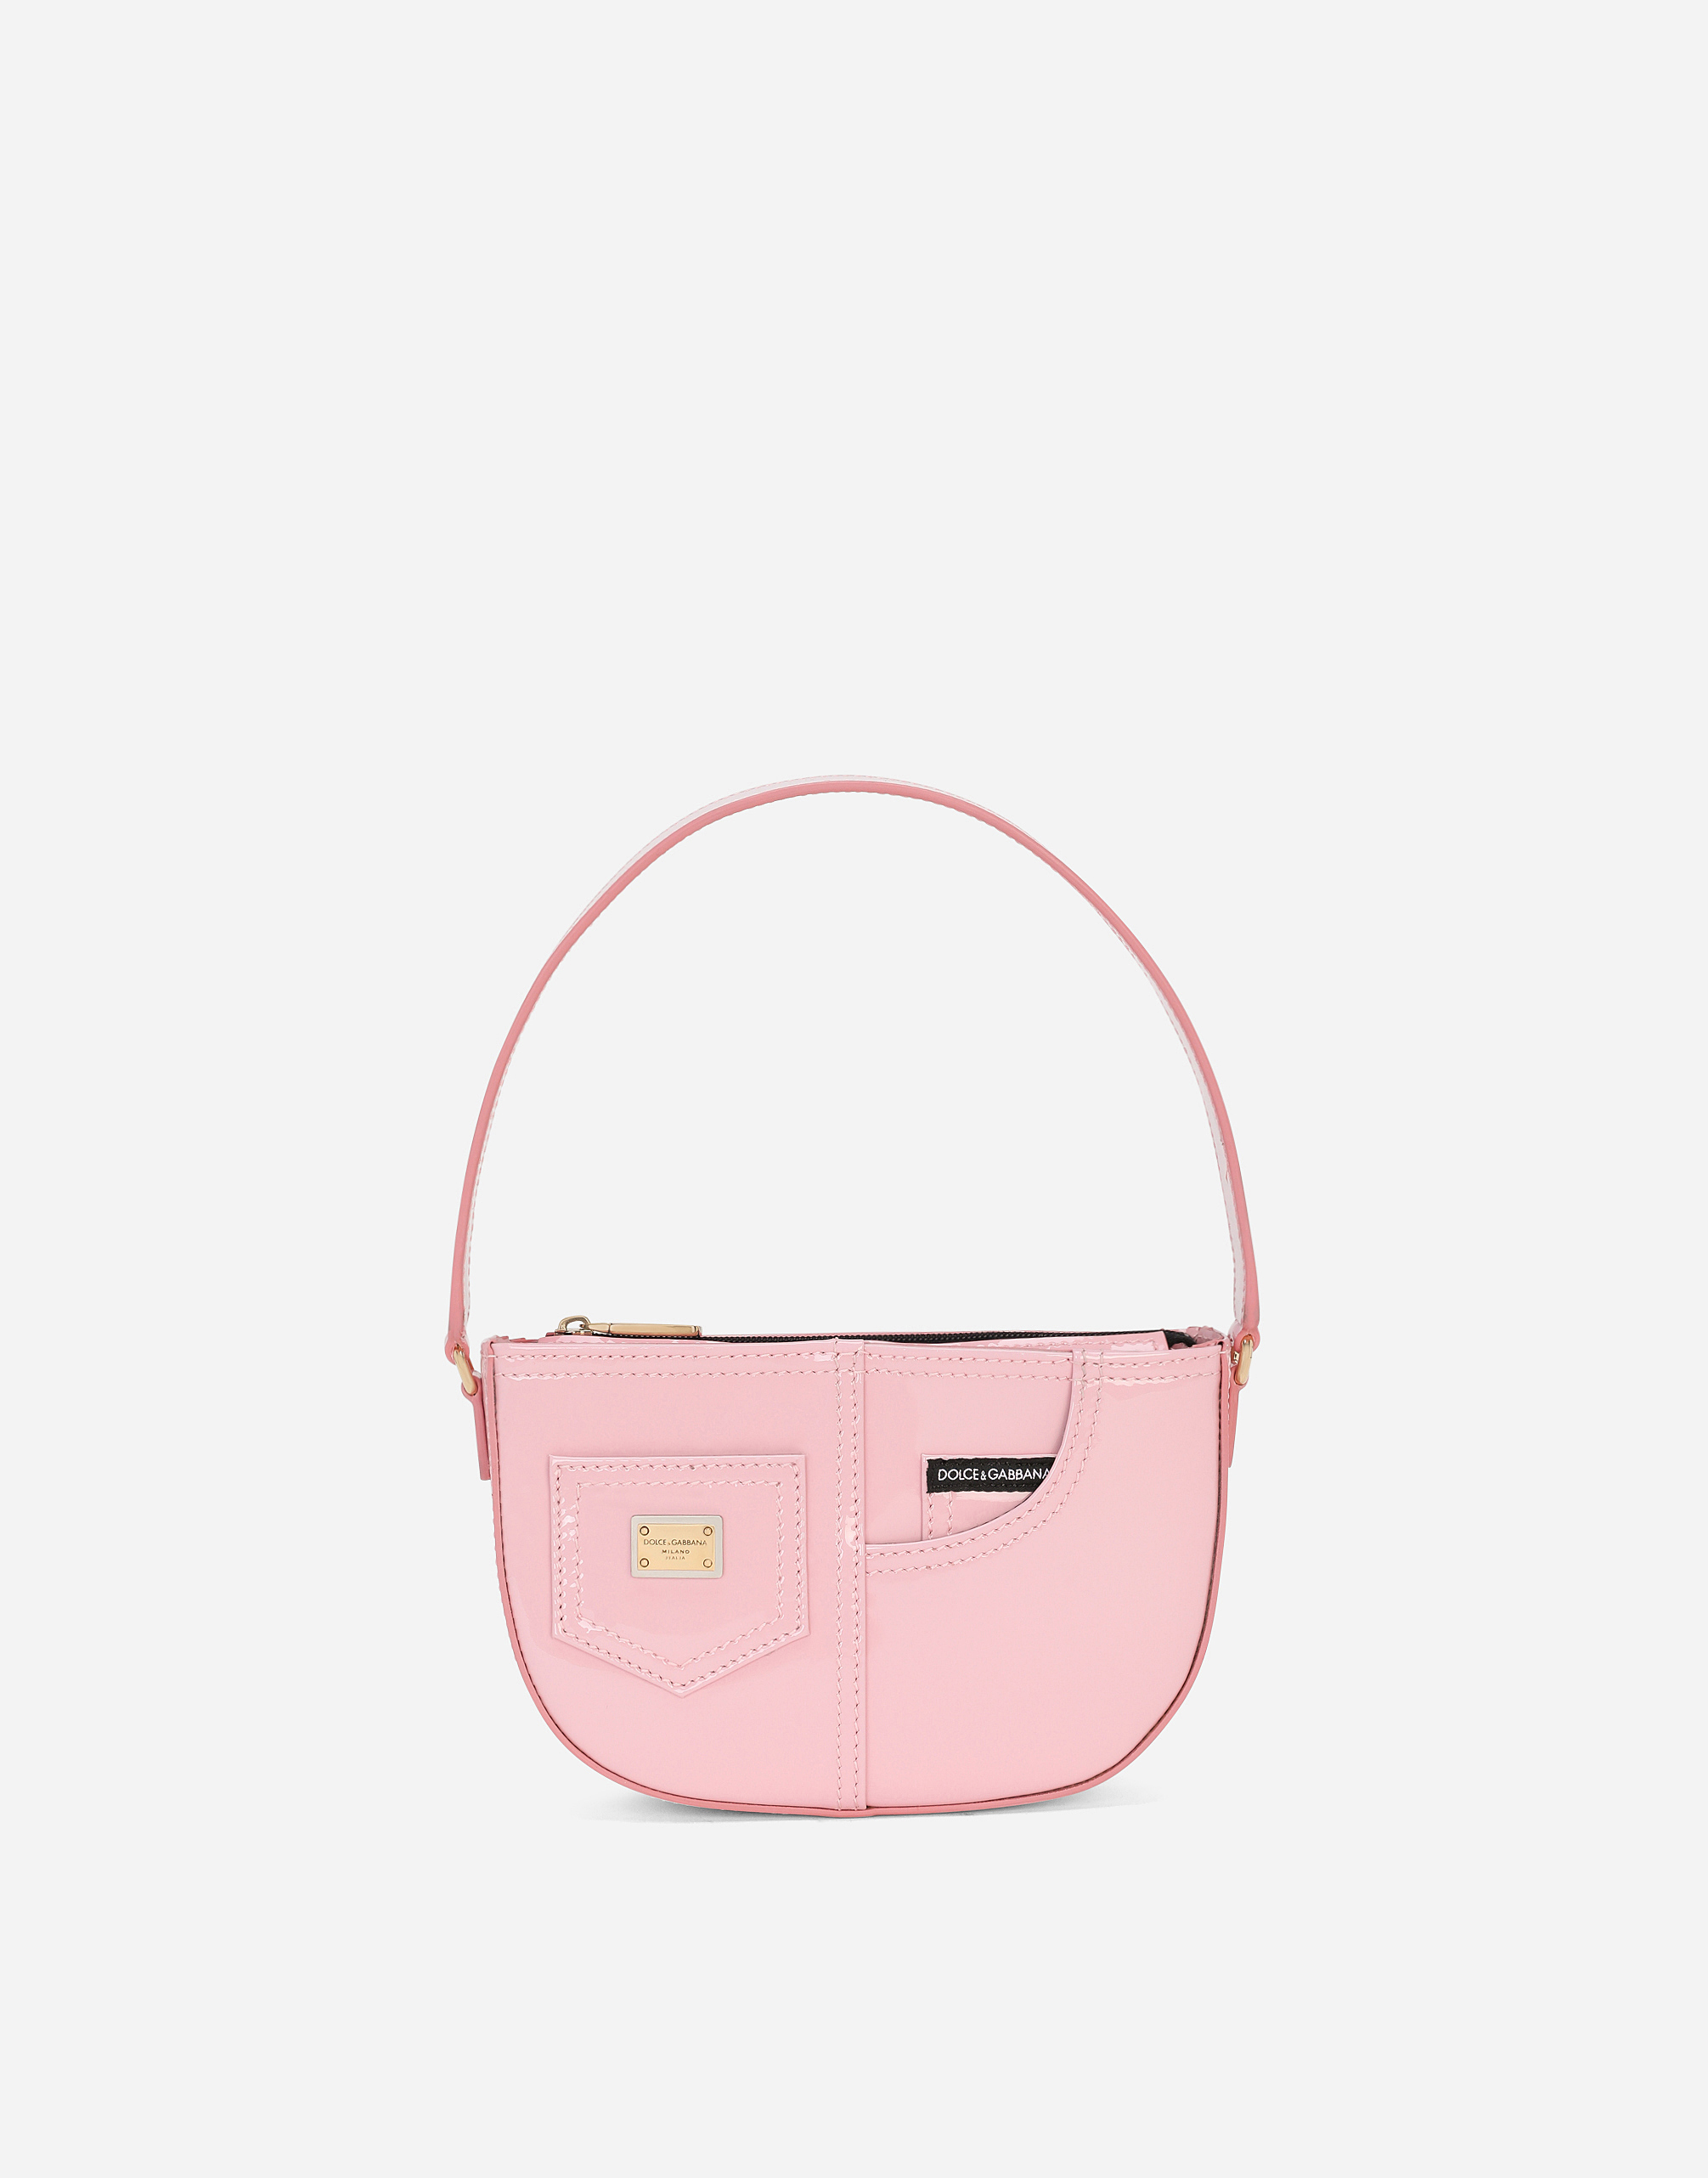 Dolce & Gabbana Kids Patent Leather Tote Bag